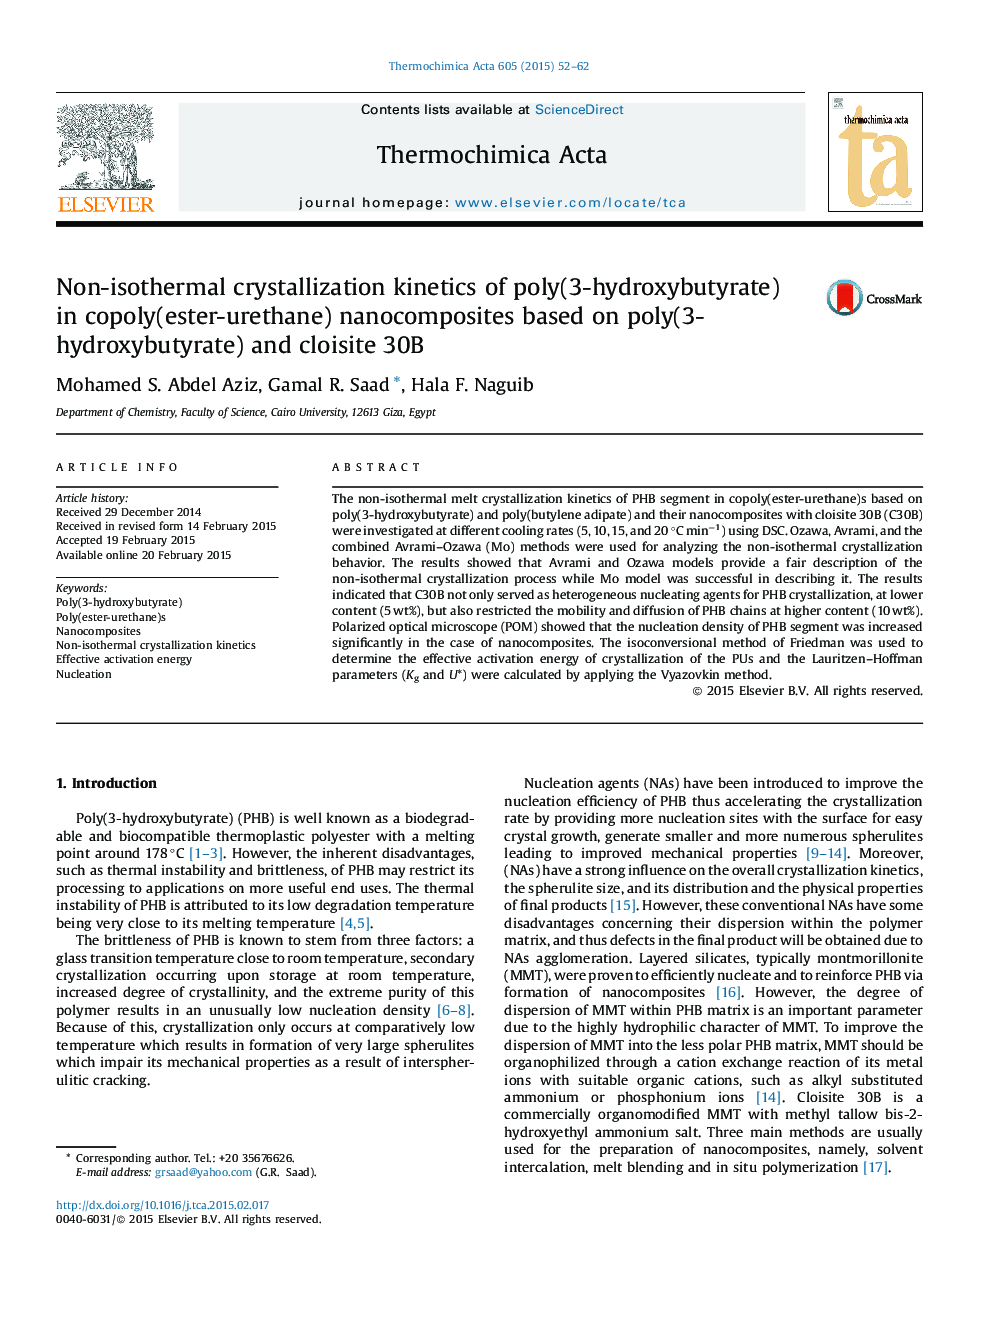 Non-isothermal crystallization kinetics of poly(3-hydroxybutyrate) in copoly(ester-urethane) nanocomposites based on poly(3-hydroxybutyrate) and cloisite 30B